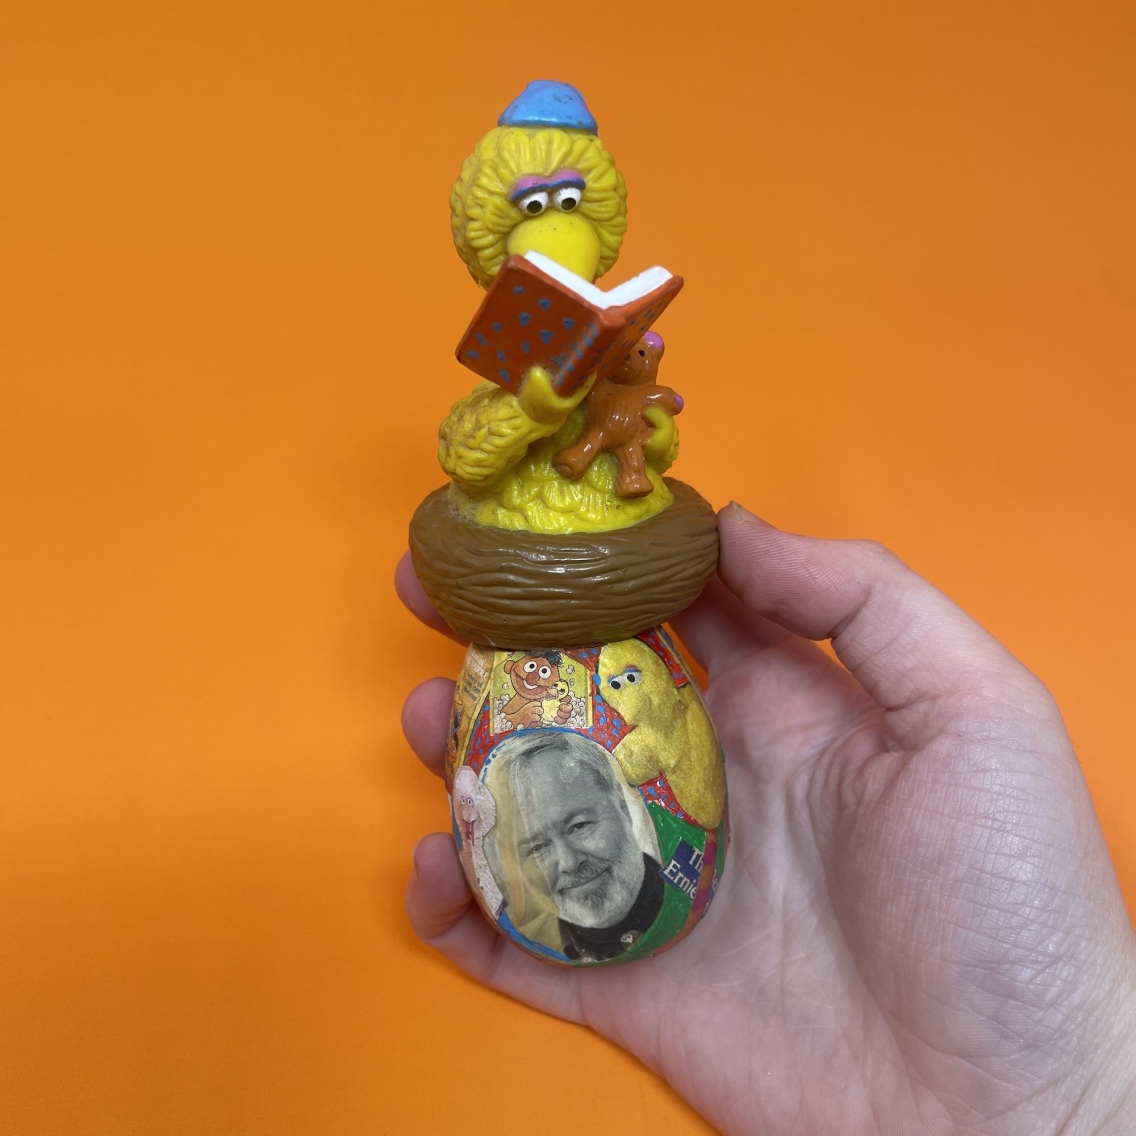 against an orange background, a white hand holding a painted and decorated wooden egg with Big Bird reading a book on top. 